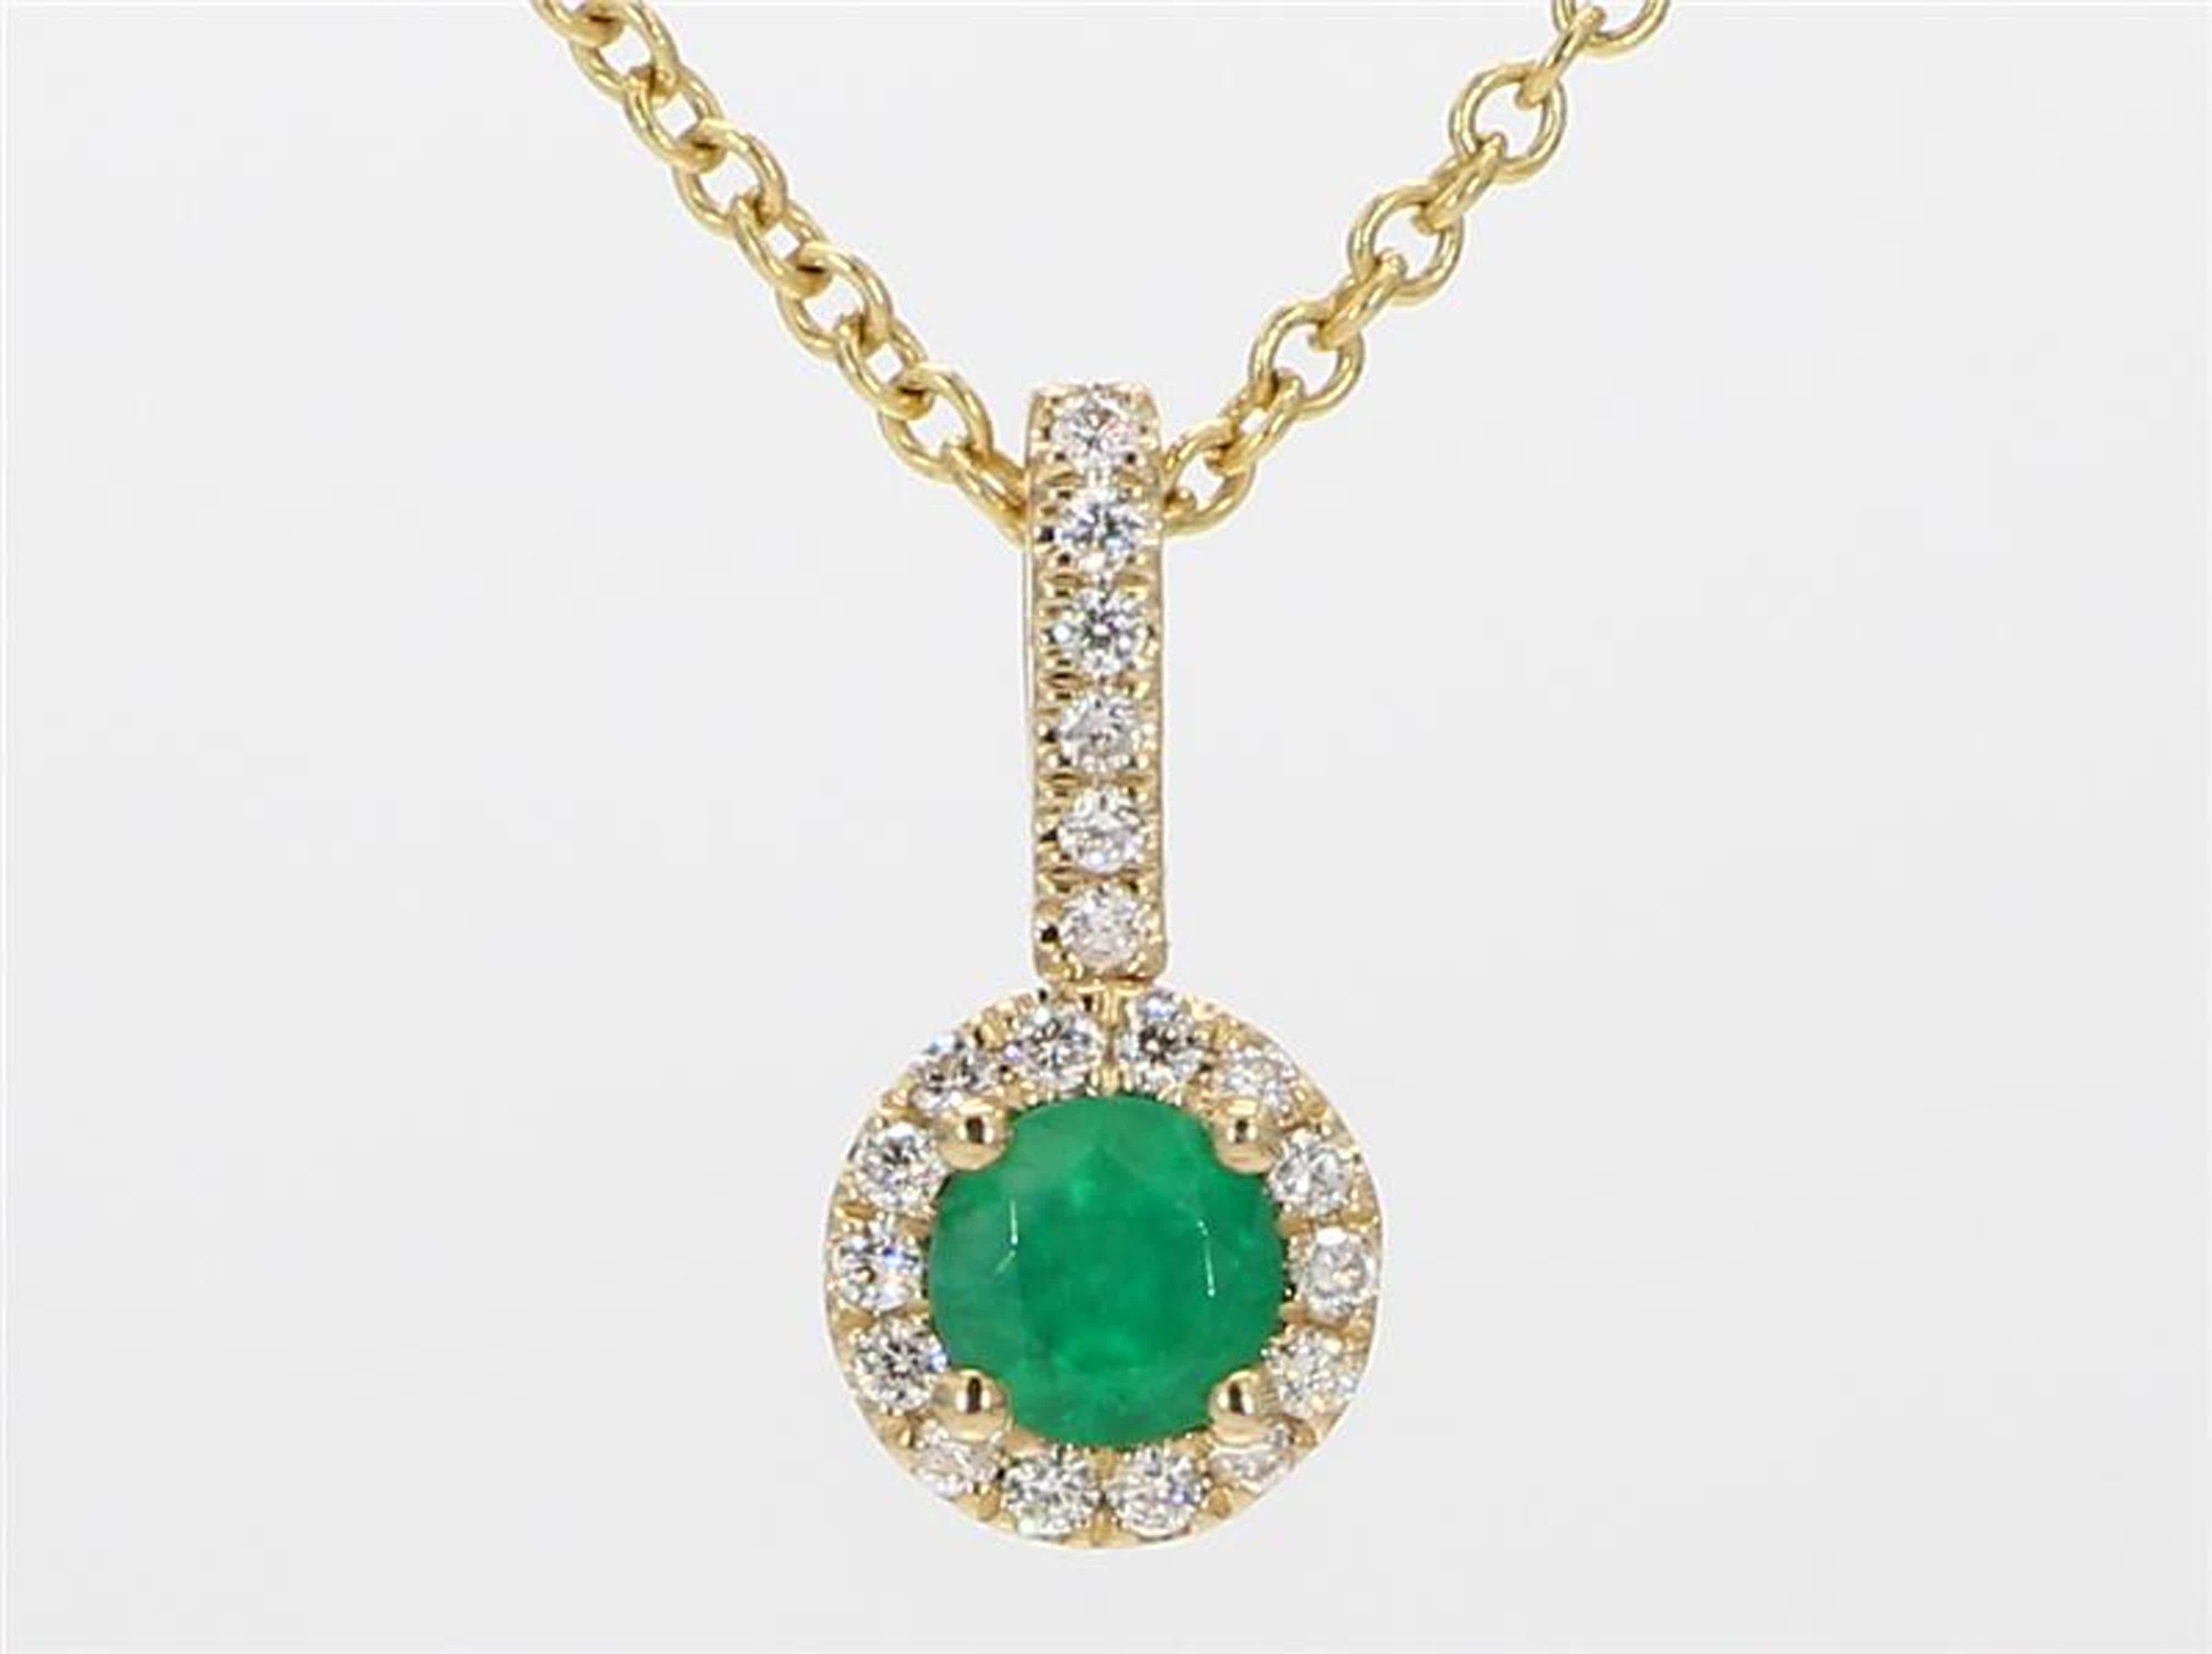 RareGemWorld's classic emerald pendant. Mounted in a beautiful 14K Yellow Gold setting with a natural round cut emerald. The emerald is surrounded by natural round white diamond melee in a beautiful single halo as well as continuing on the bell of